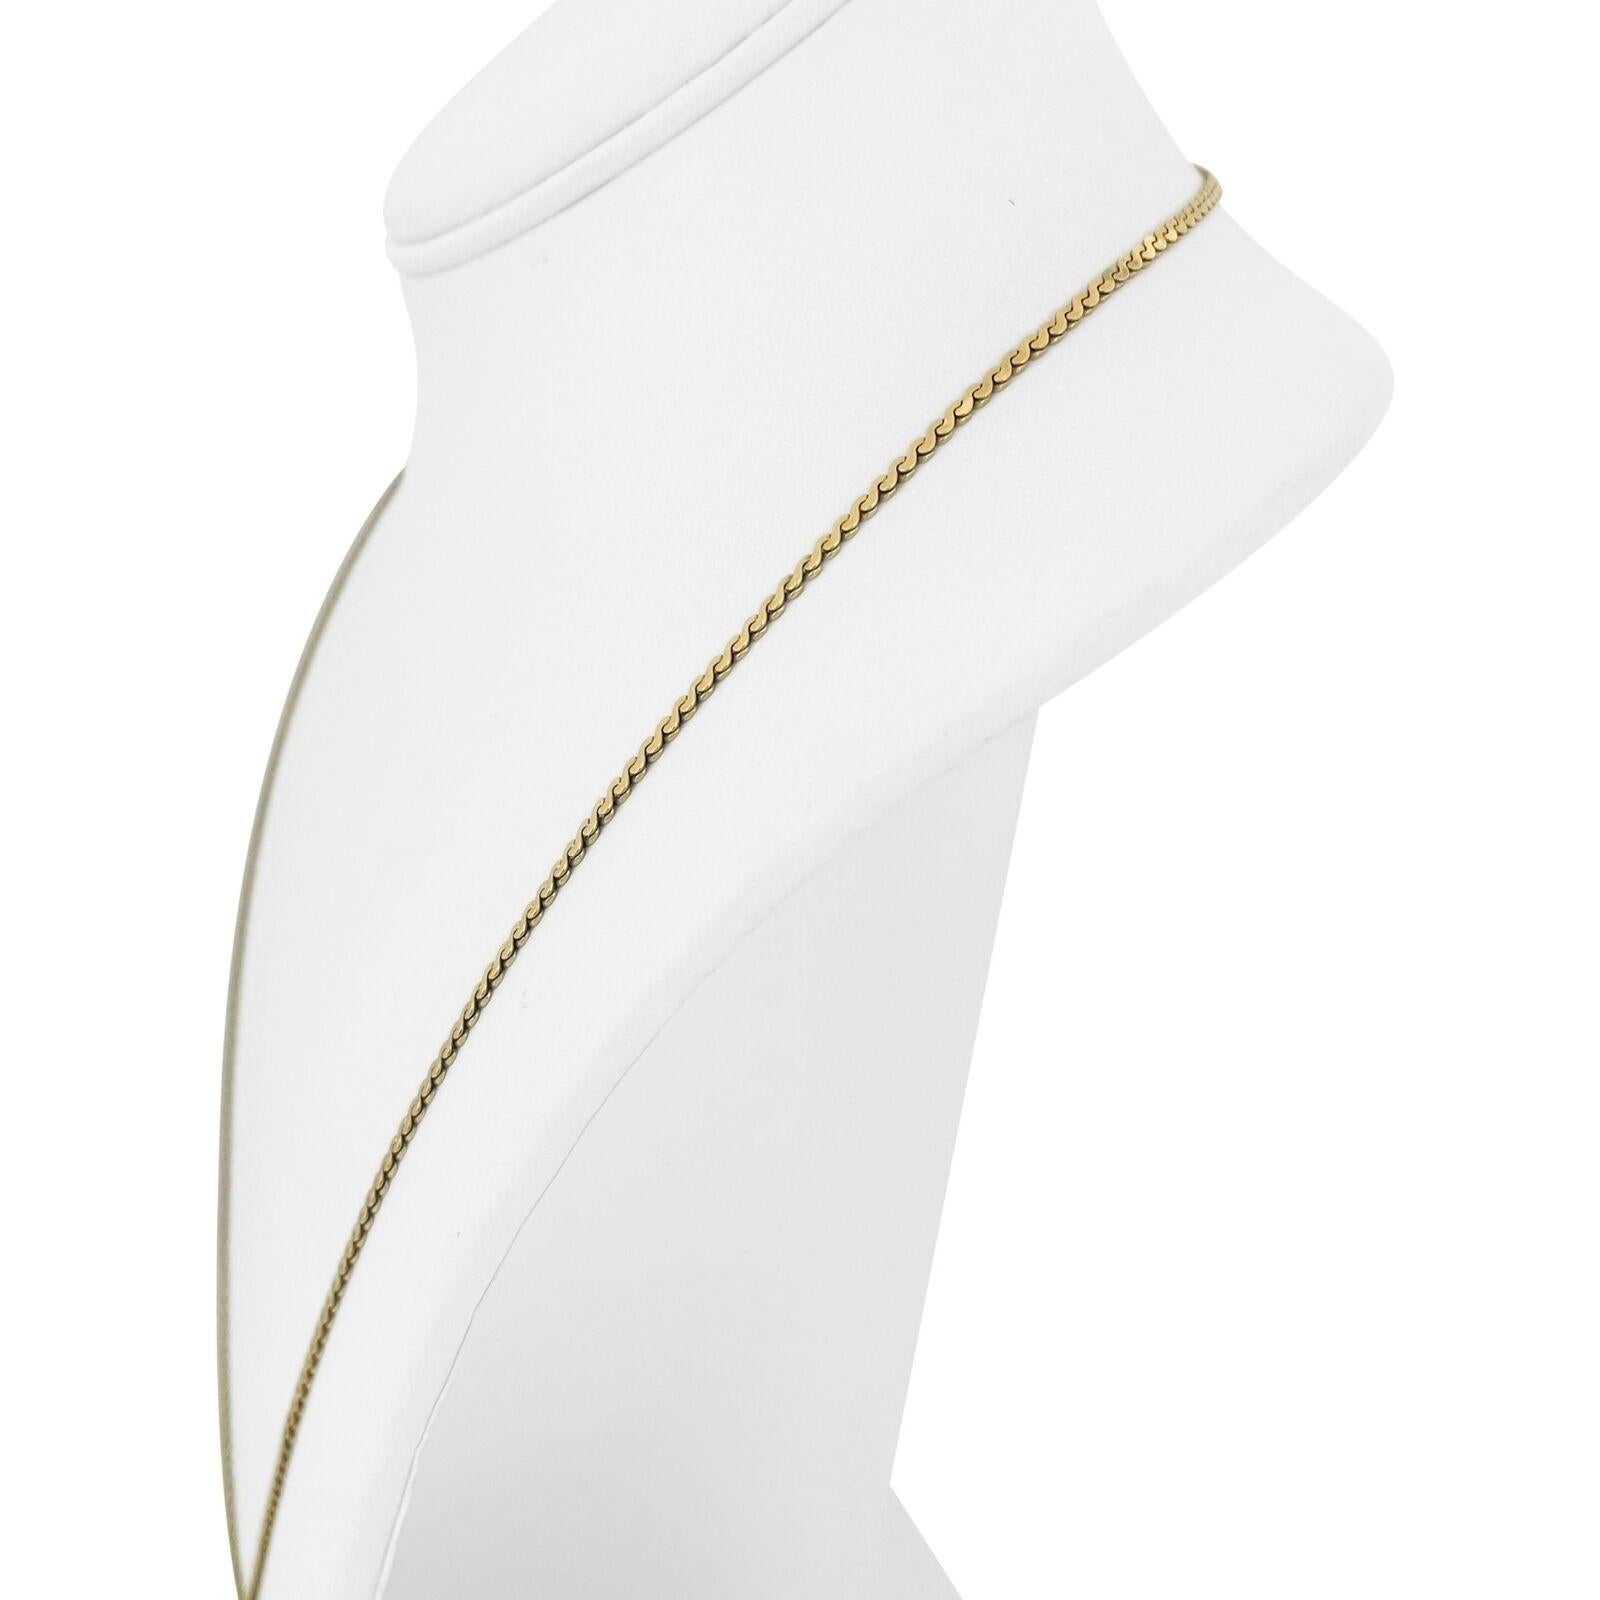 14k Yellow Gold 9.8g Solid Thin 2mm Serpentine Link Chain Necklace 24